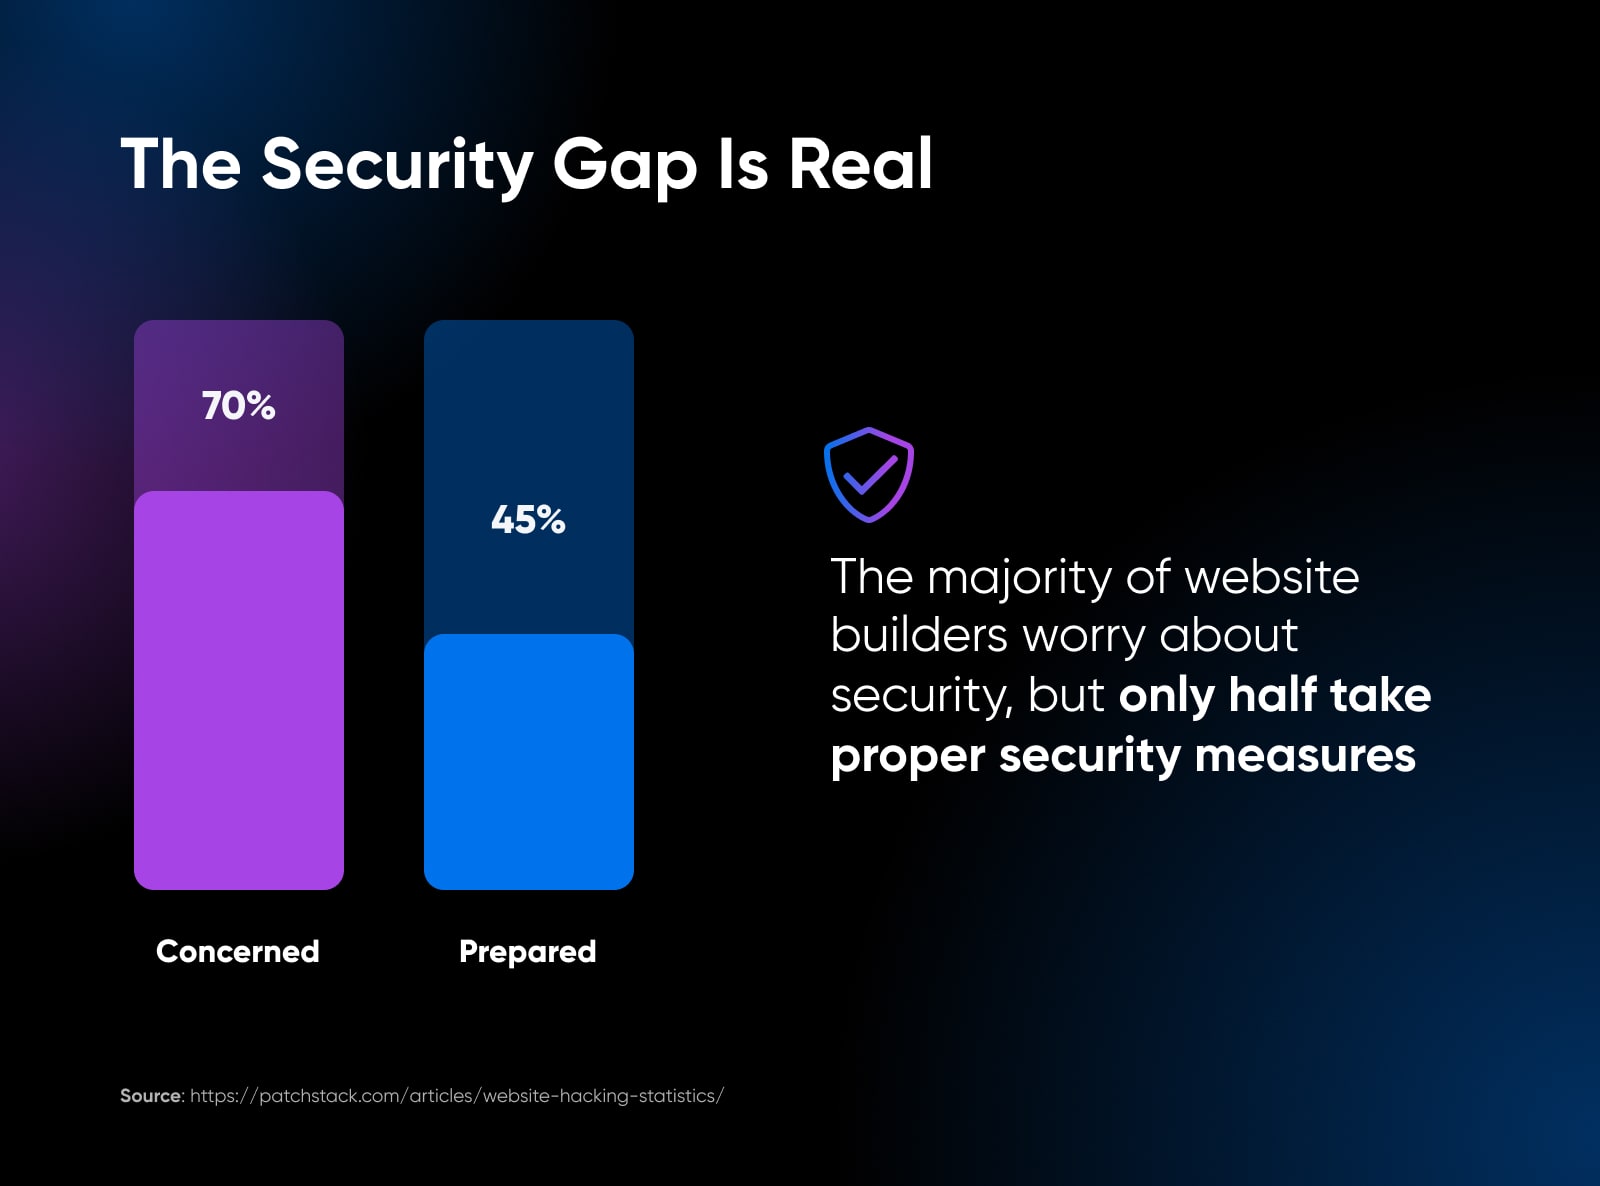 70% of website builders are concerned about security but only 45% claim to actually be prepared 